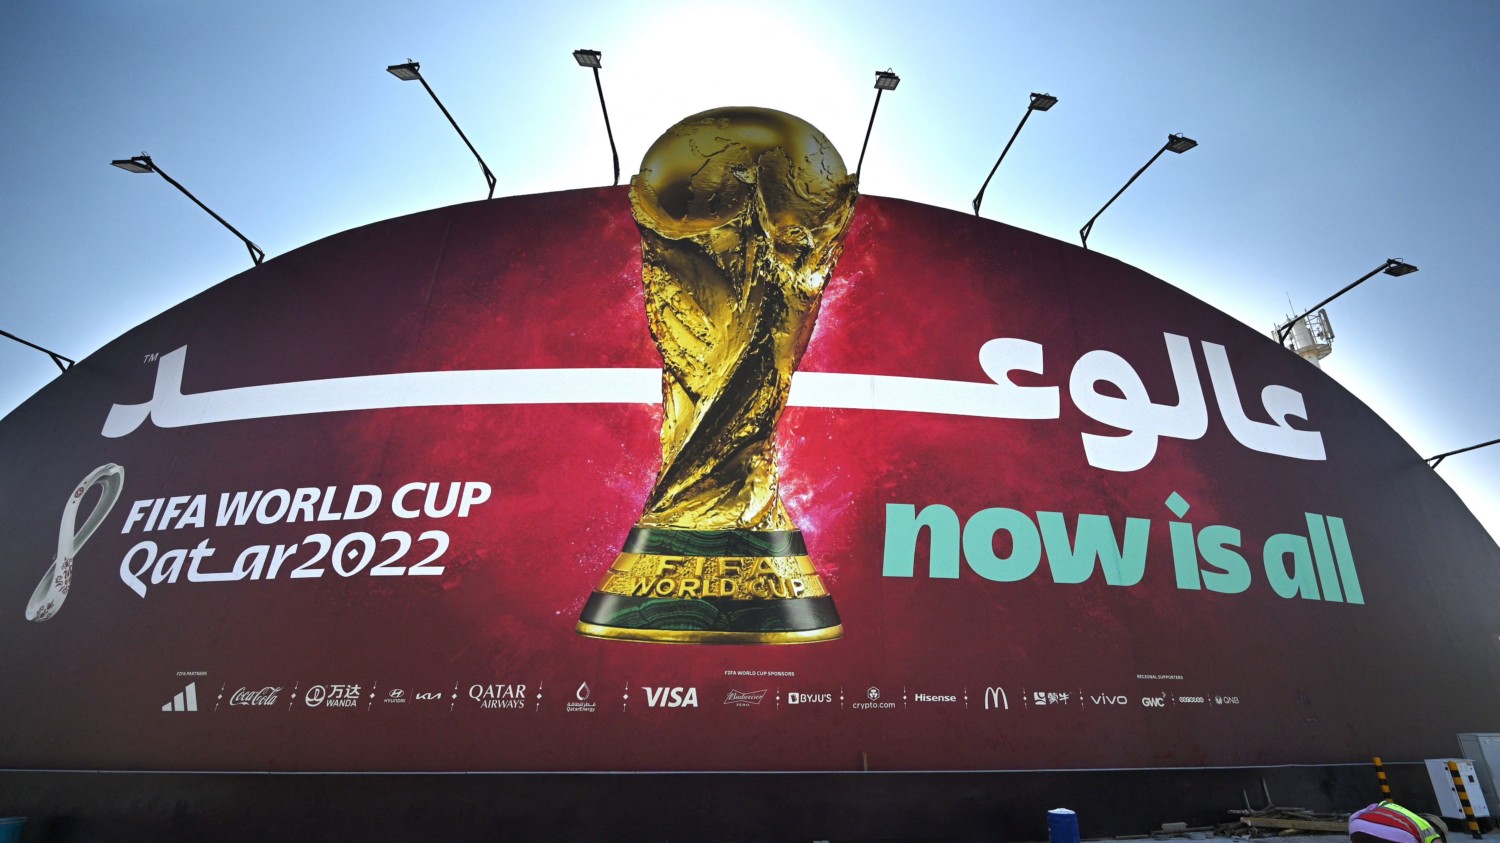 World Cup Organizers Compensating Soccer Fans for Positive PR